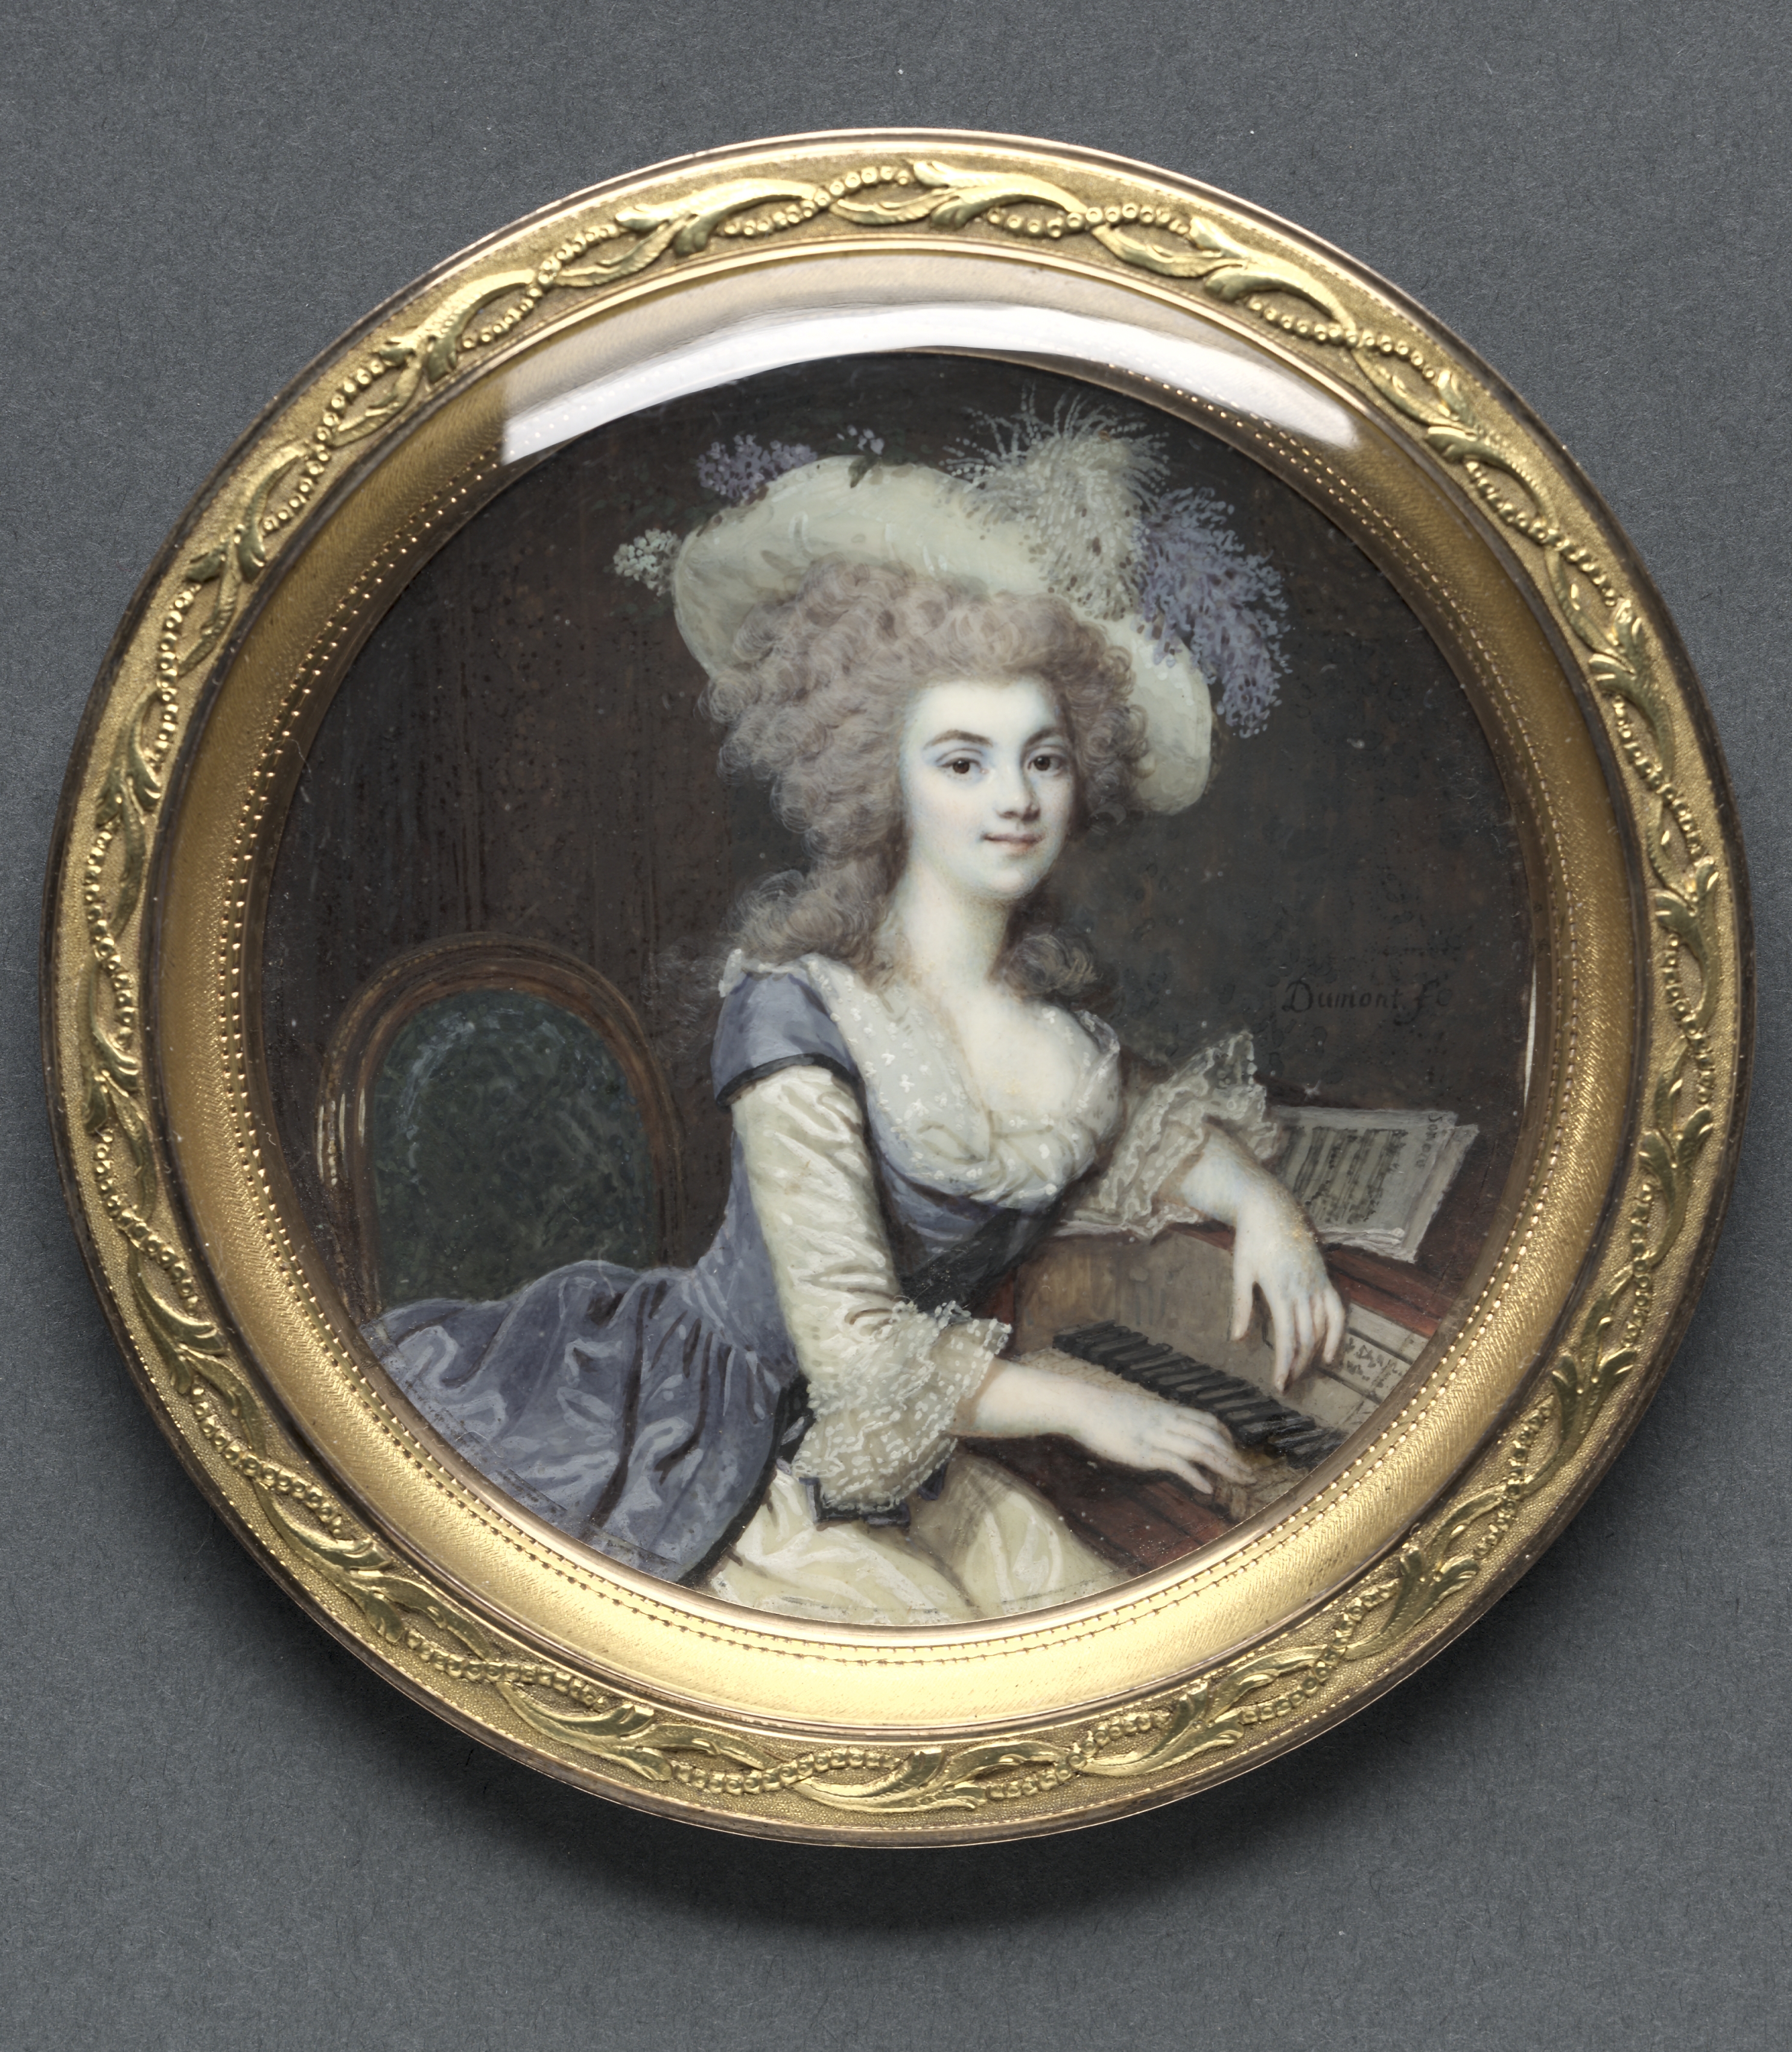 Portrait of a Woman at a Harpsichord